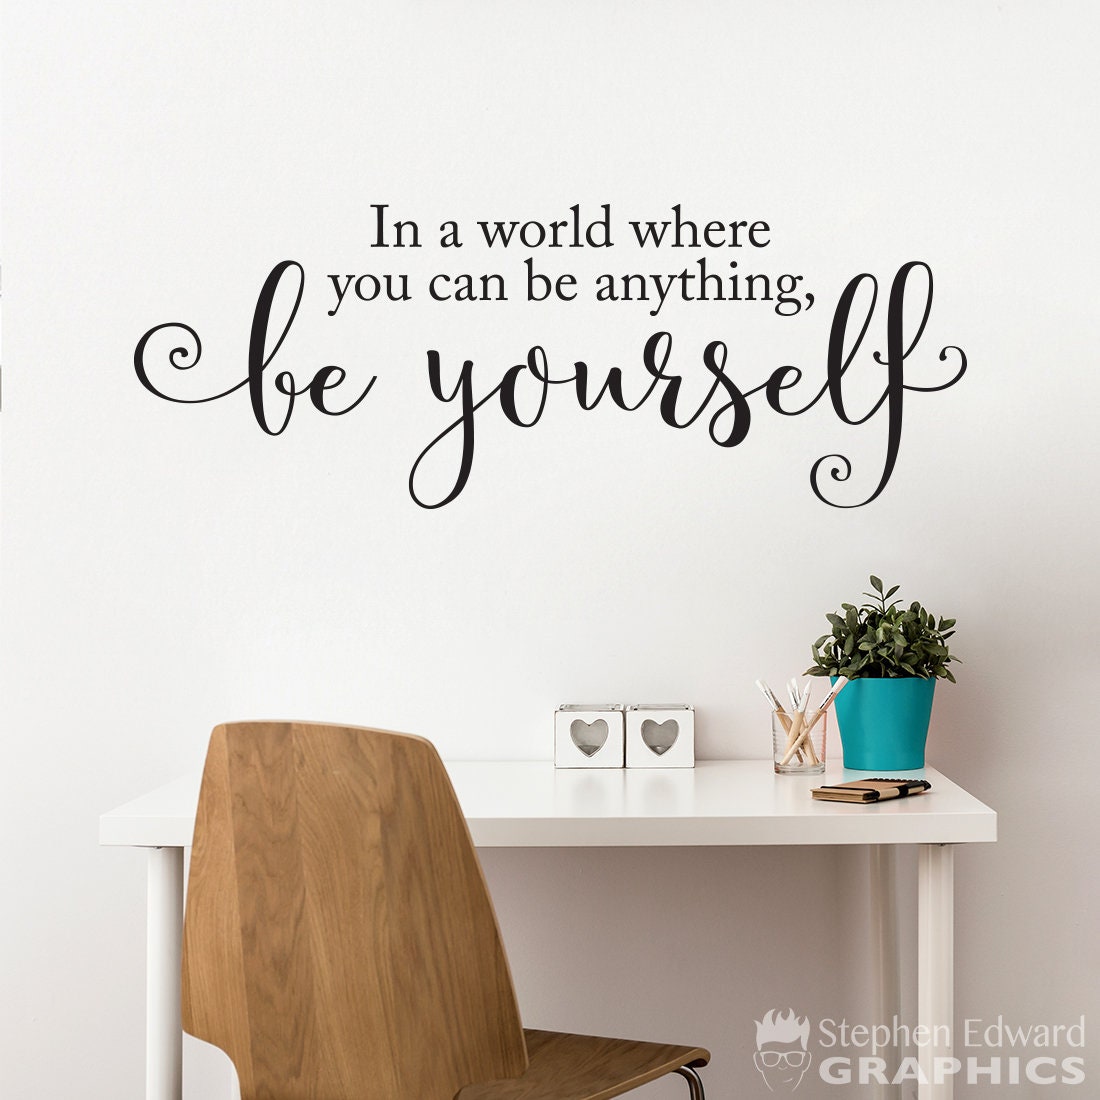 Be Yourself Wall Decal | In a world where you can be anything be yourself Quote Vinyl